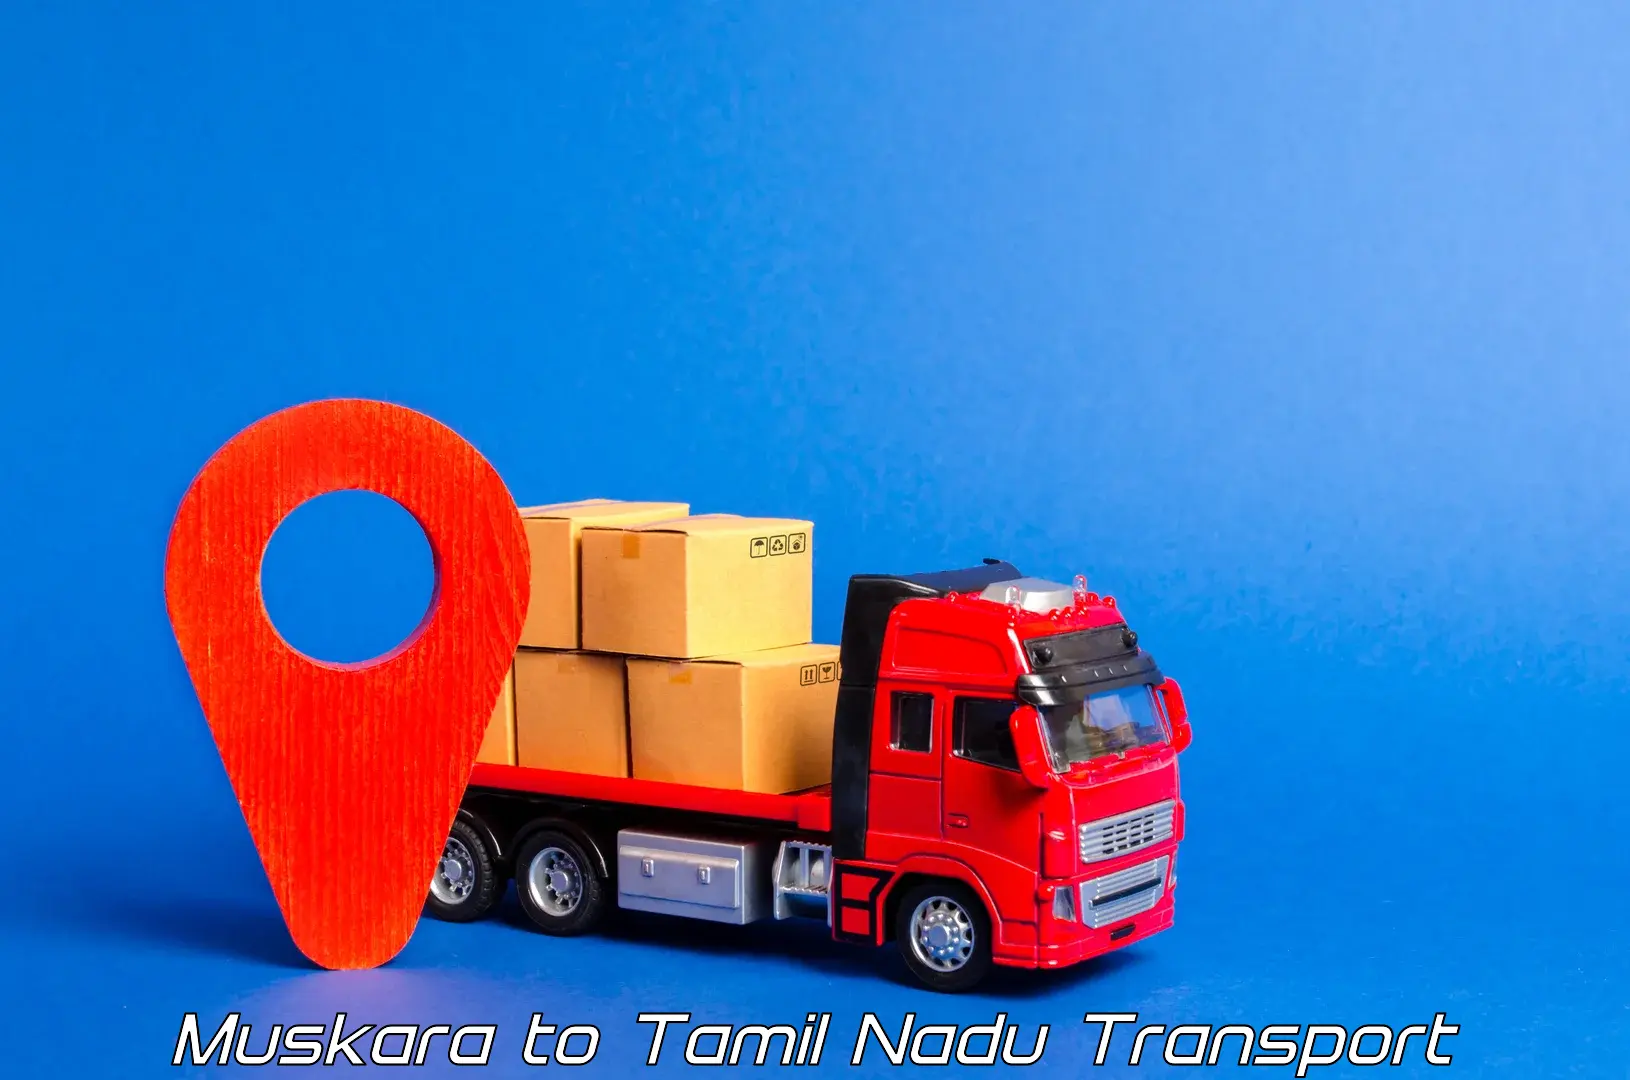 Commercial transport service Muskara to Vellore Institute of Technology